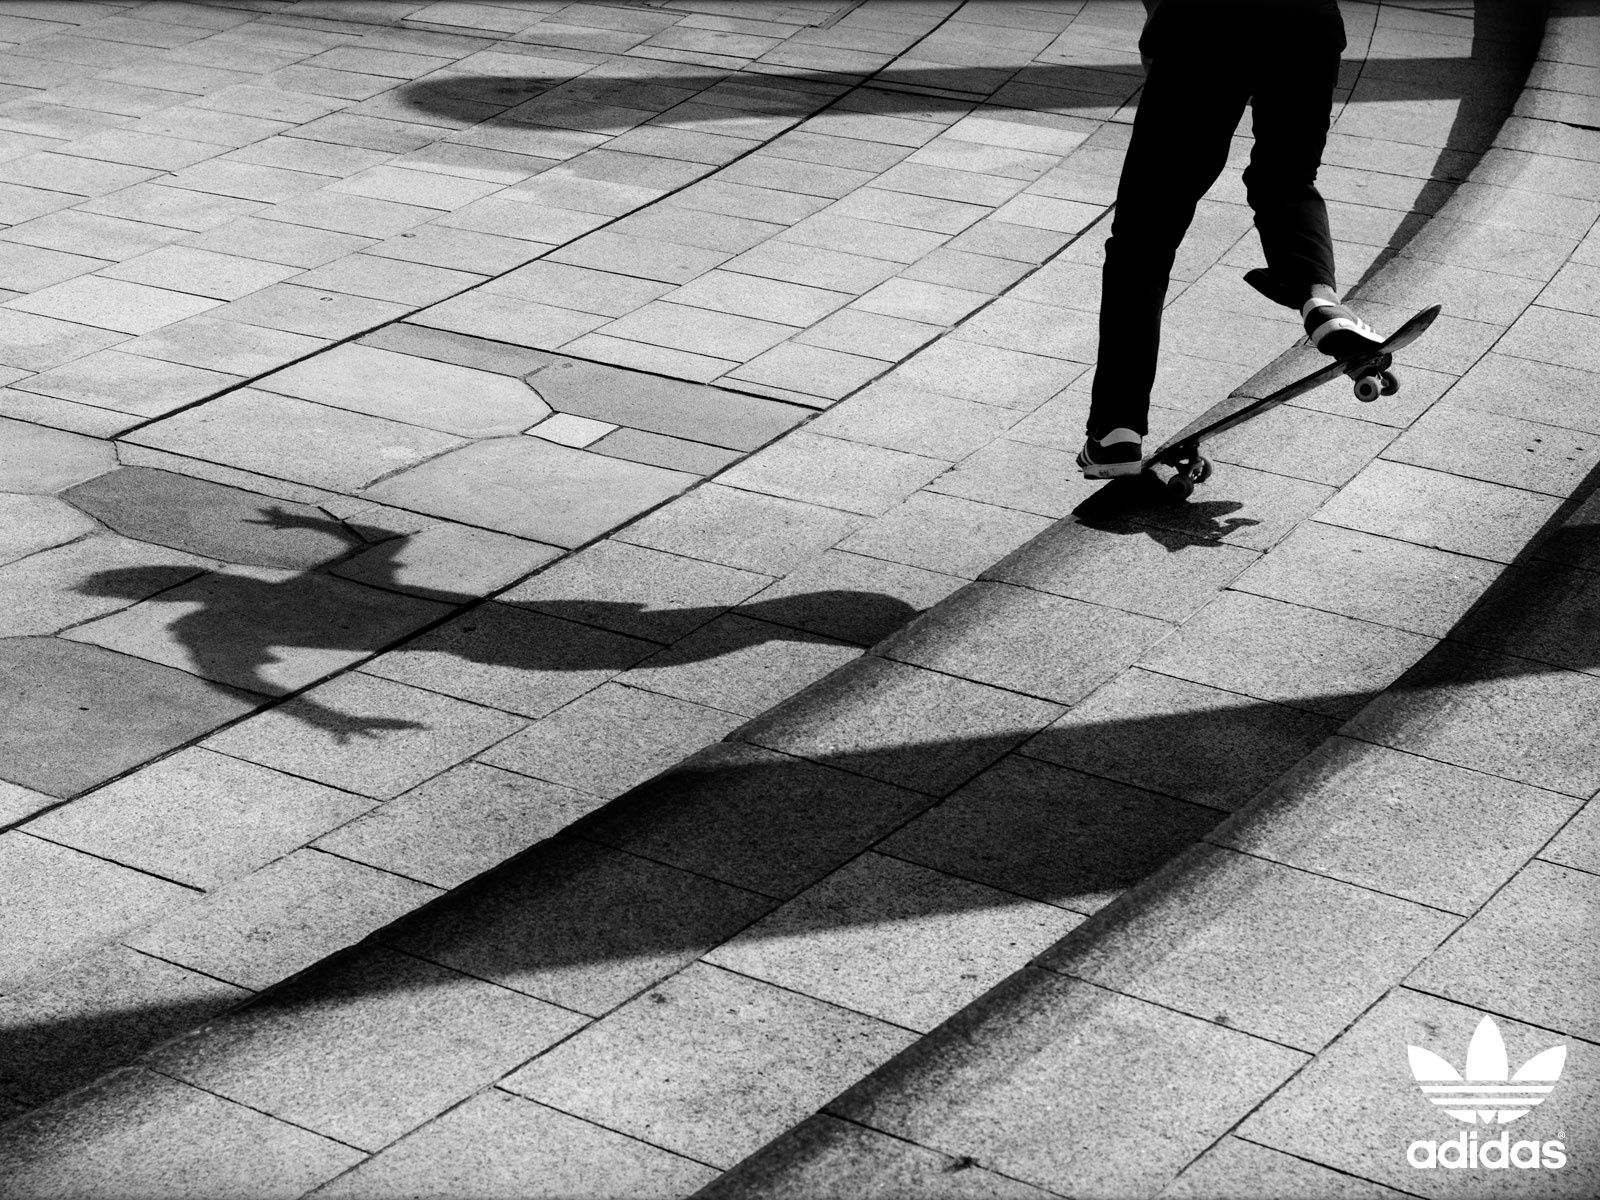 Skateboarding HD Wallpapers and Backgrounds